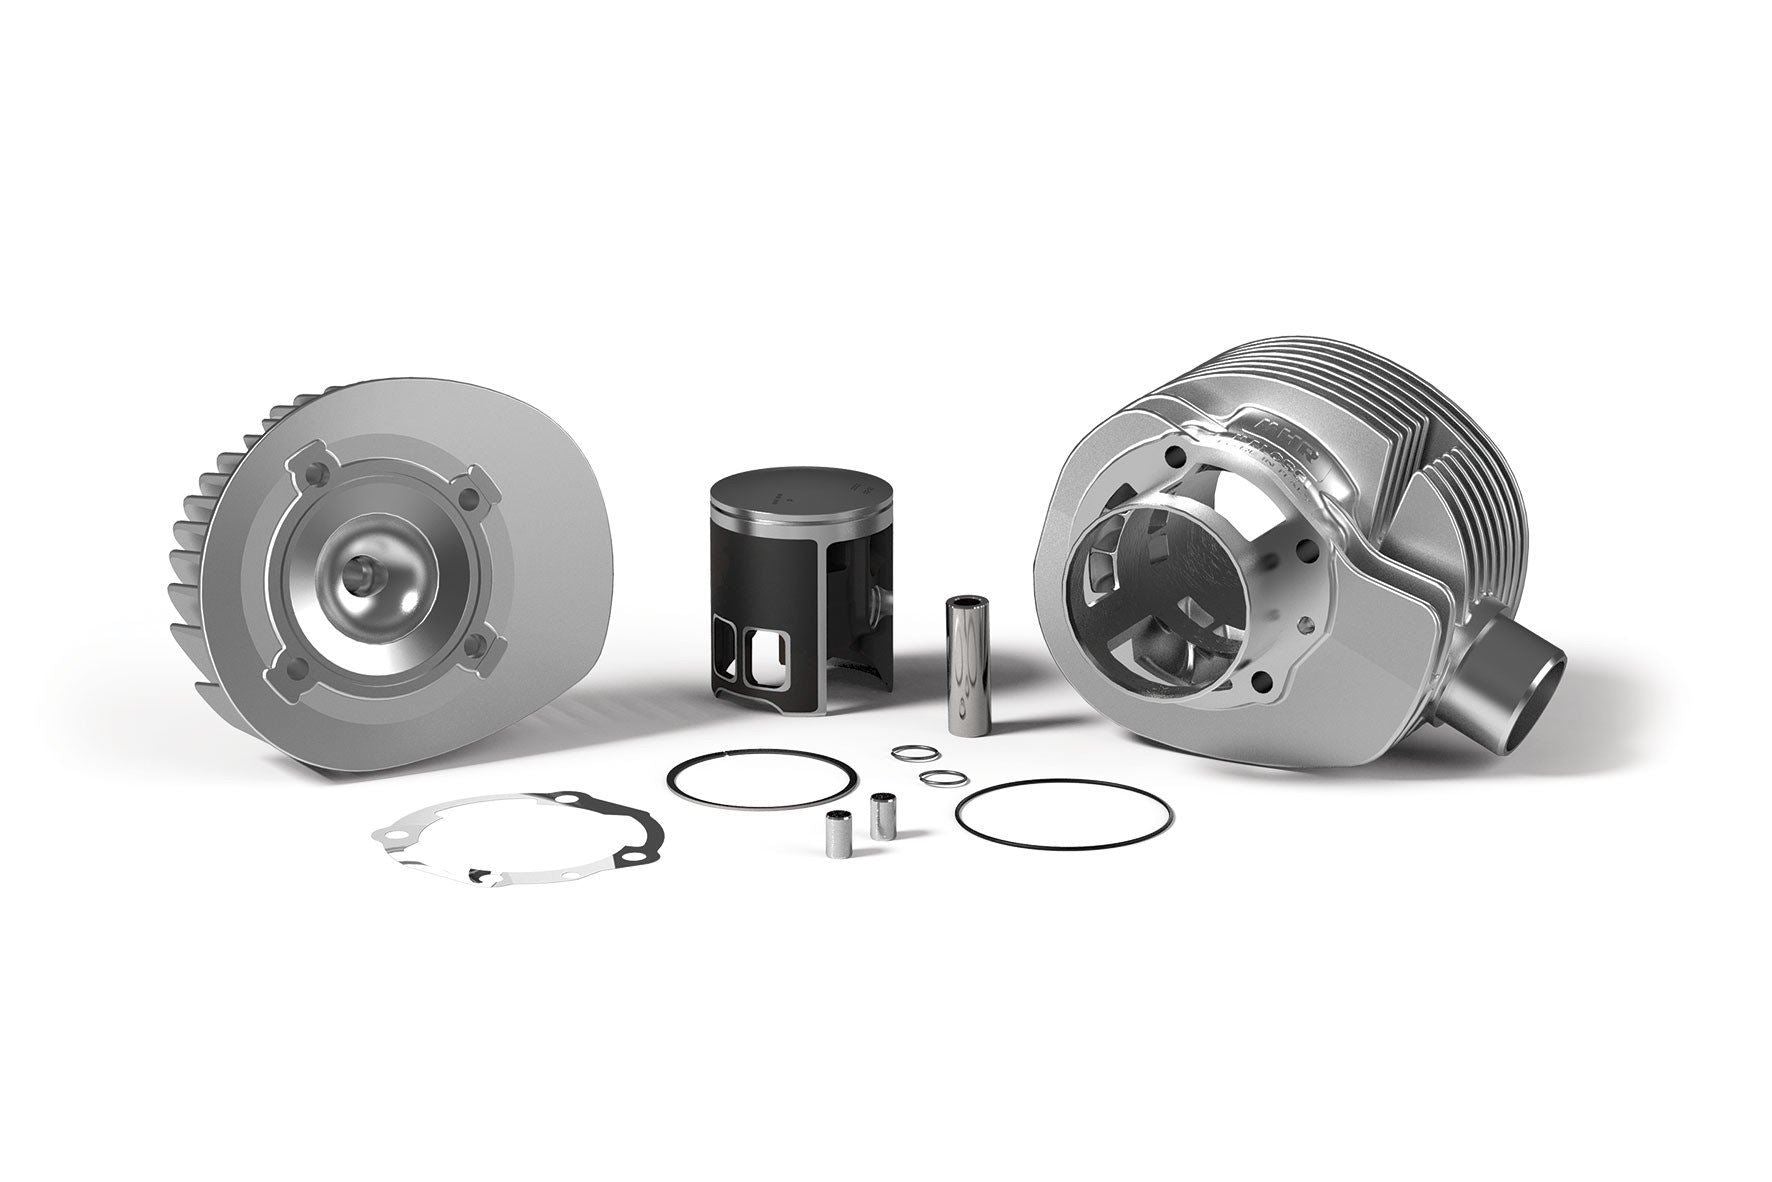 Vespa PX200 P200E Rally200 MALOSSI MHR 221cc Cylinder Kit 60mm Stroke with Head 2021 Version